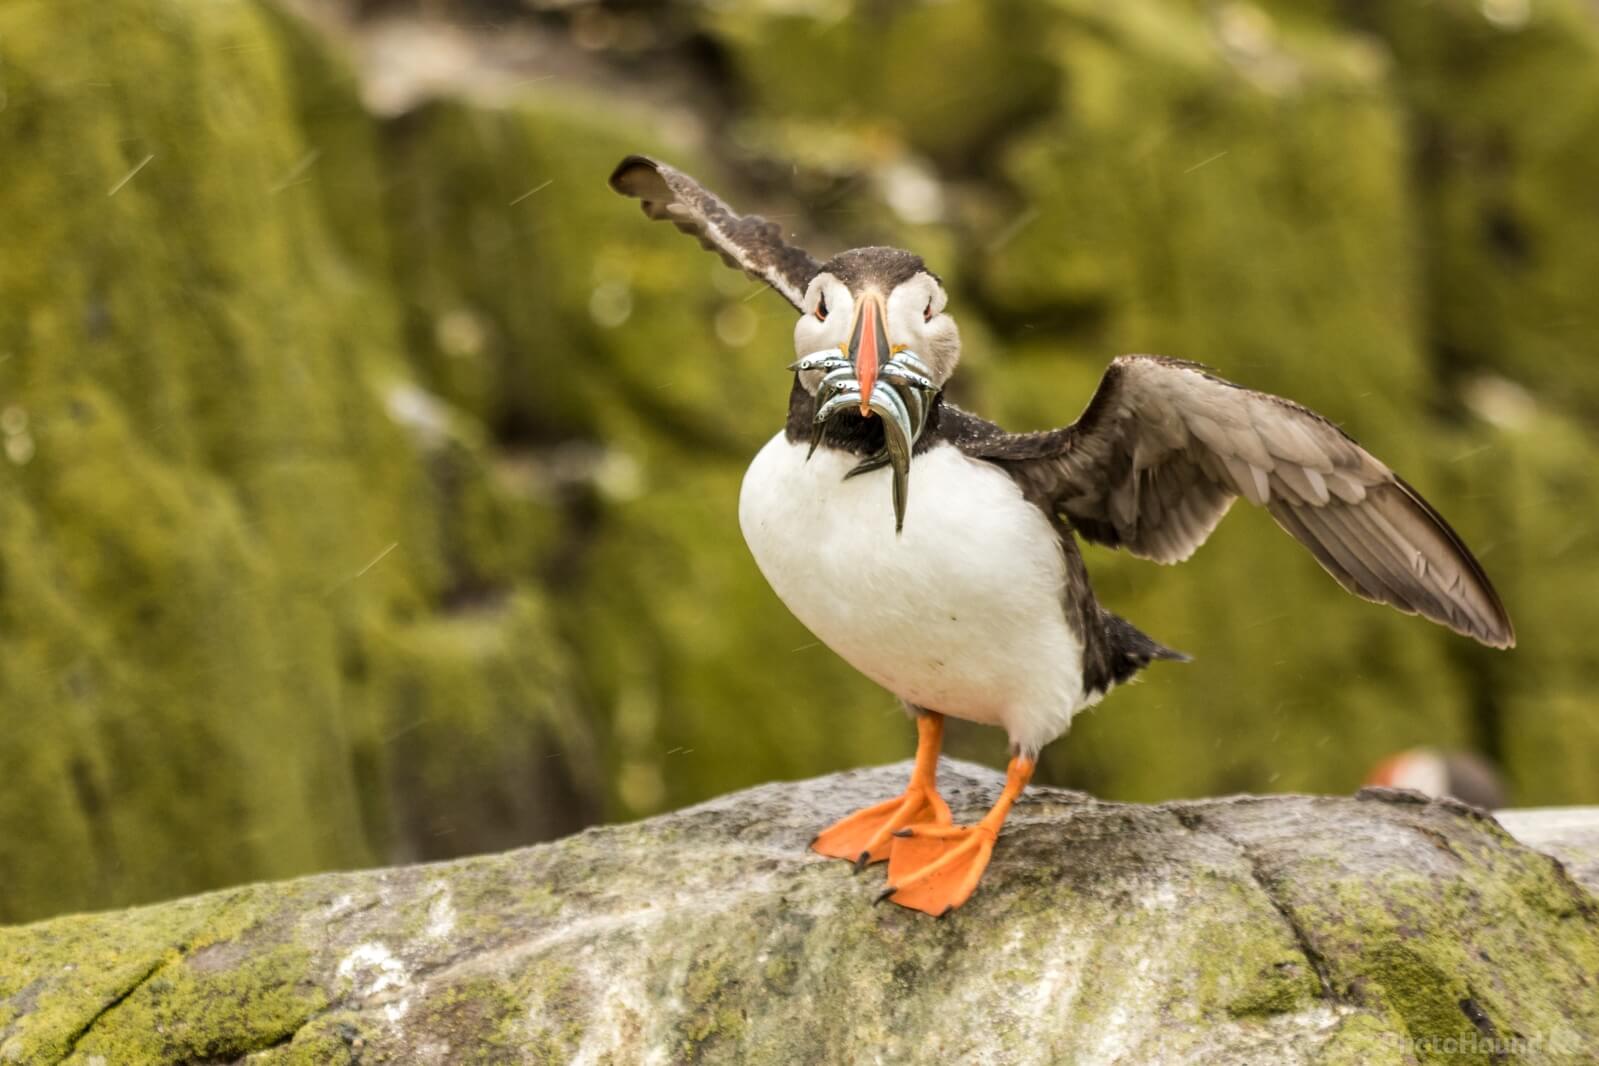 Image of The Farne Islands – Staple Island by Andy Killingbeck